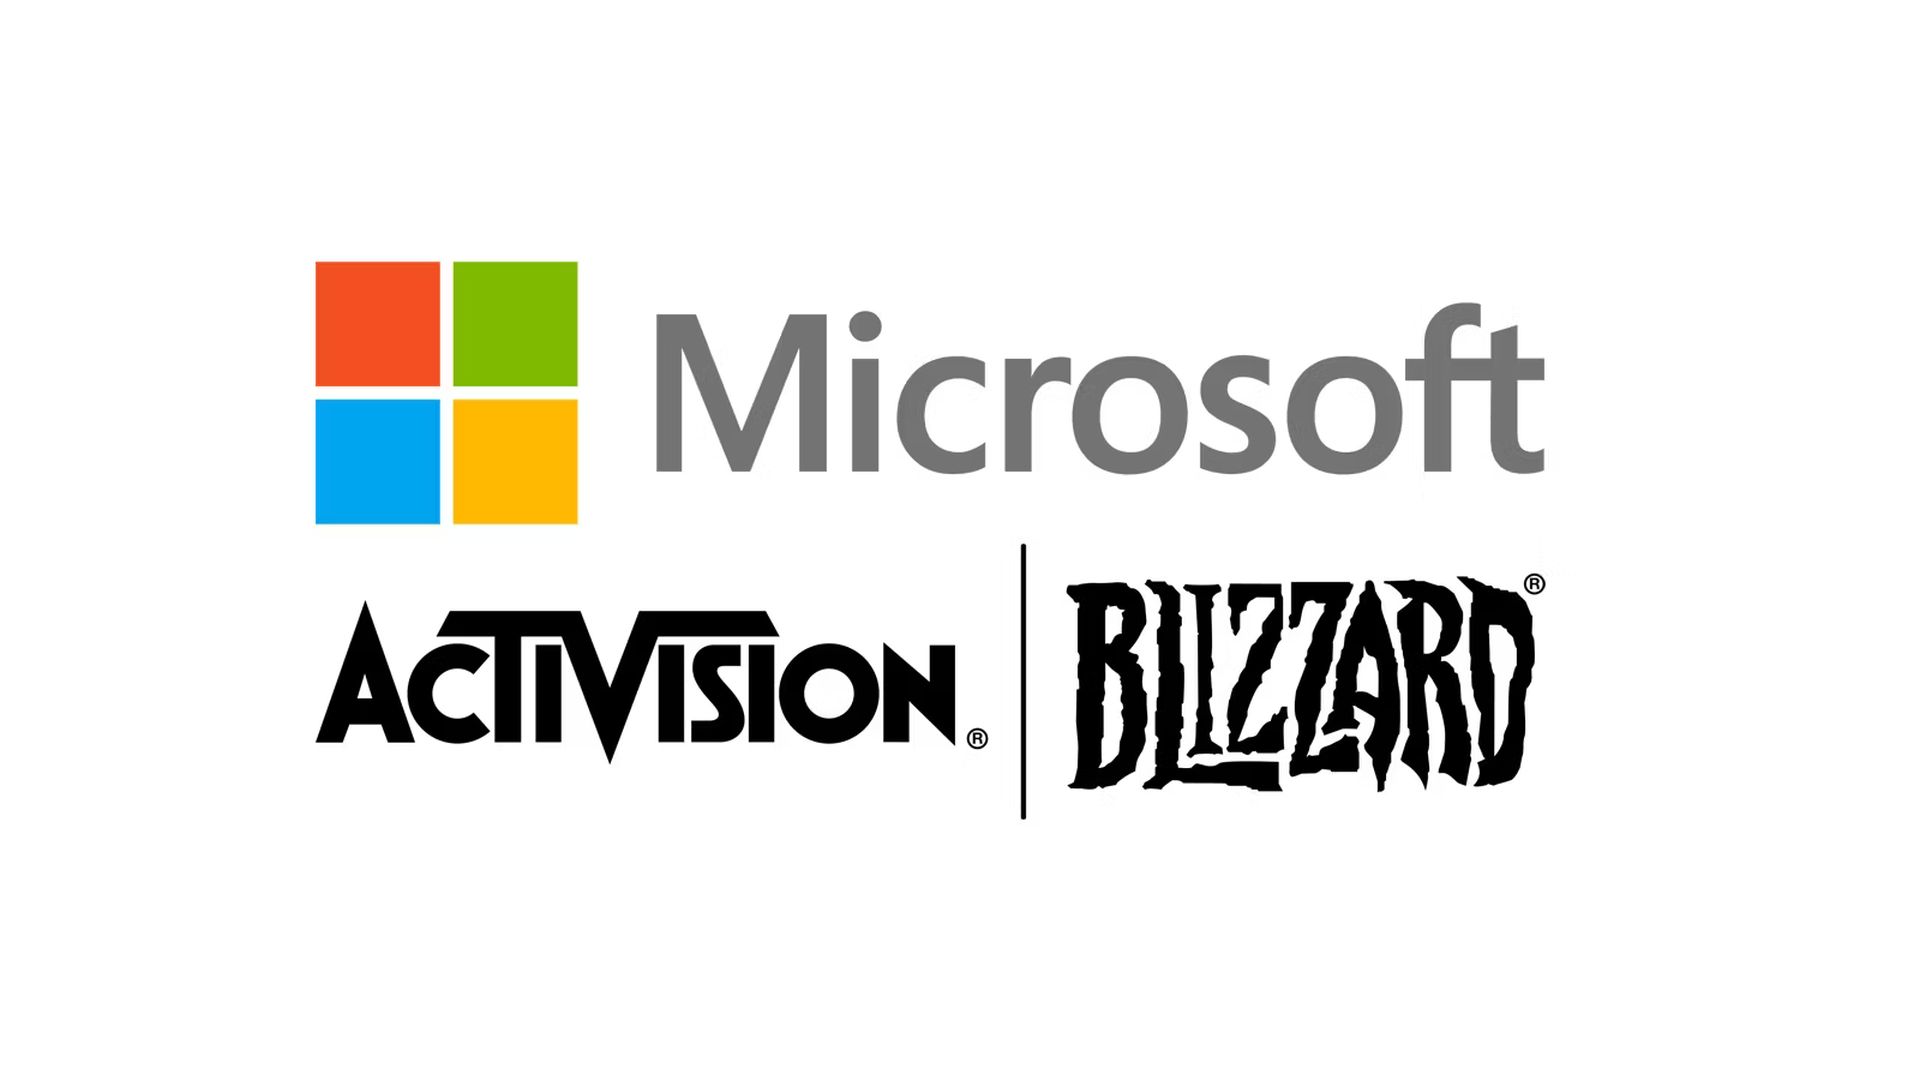 FTC Files Injunction to Block Microsoft’s Acquisition of Activision Blizzard